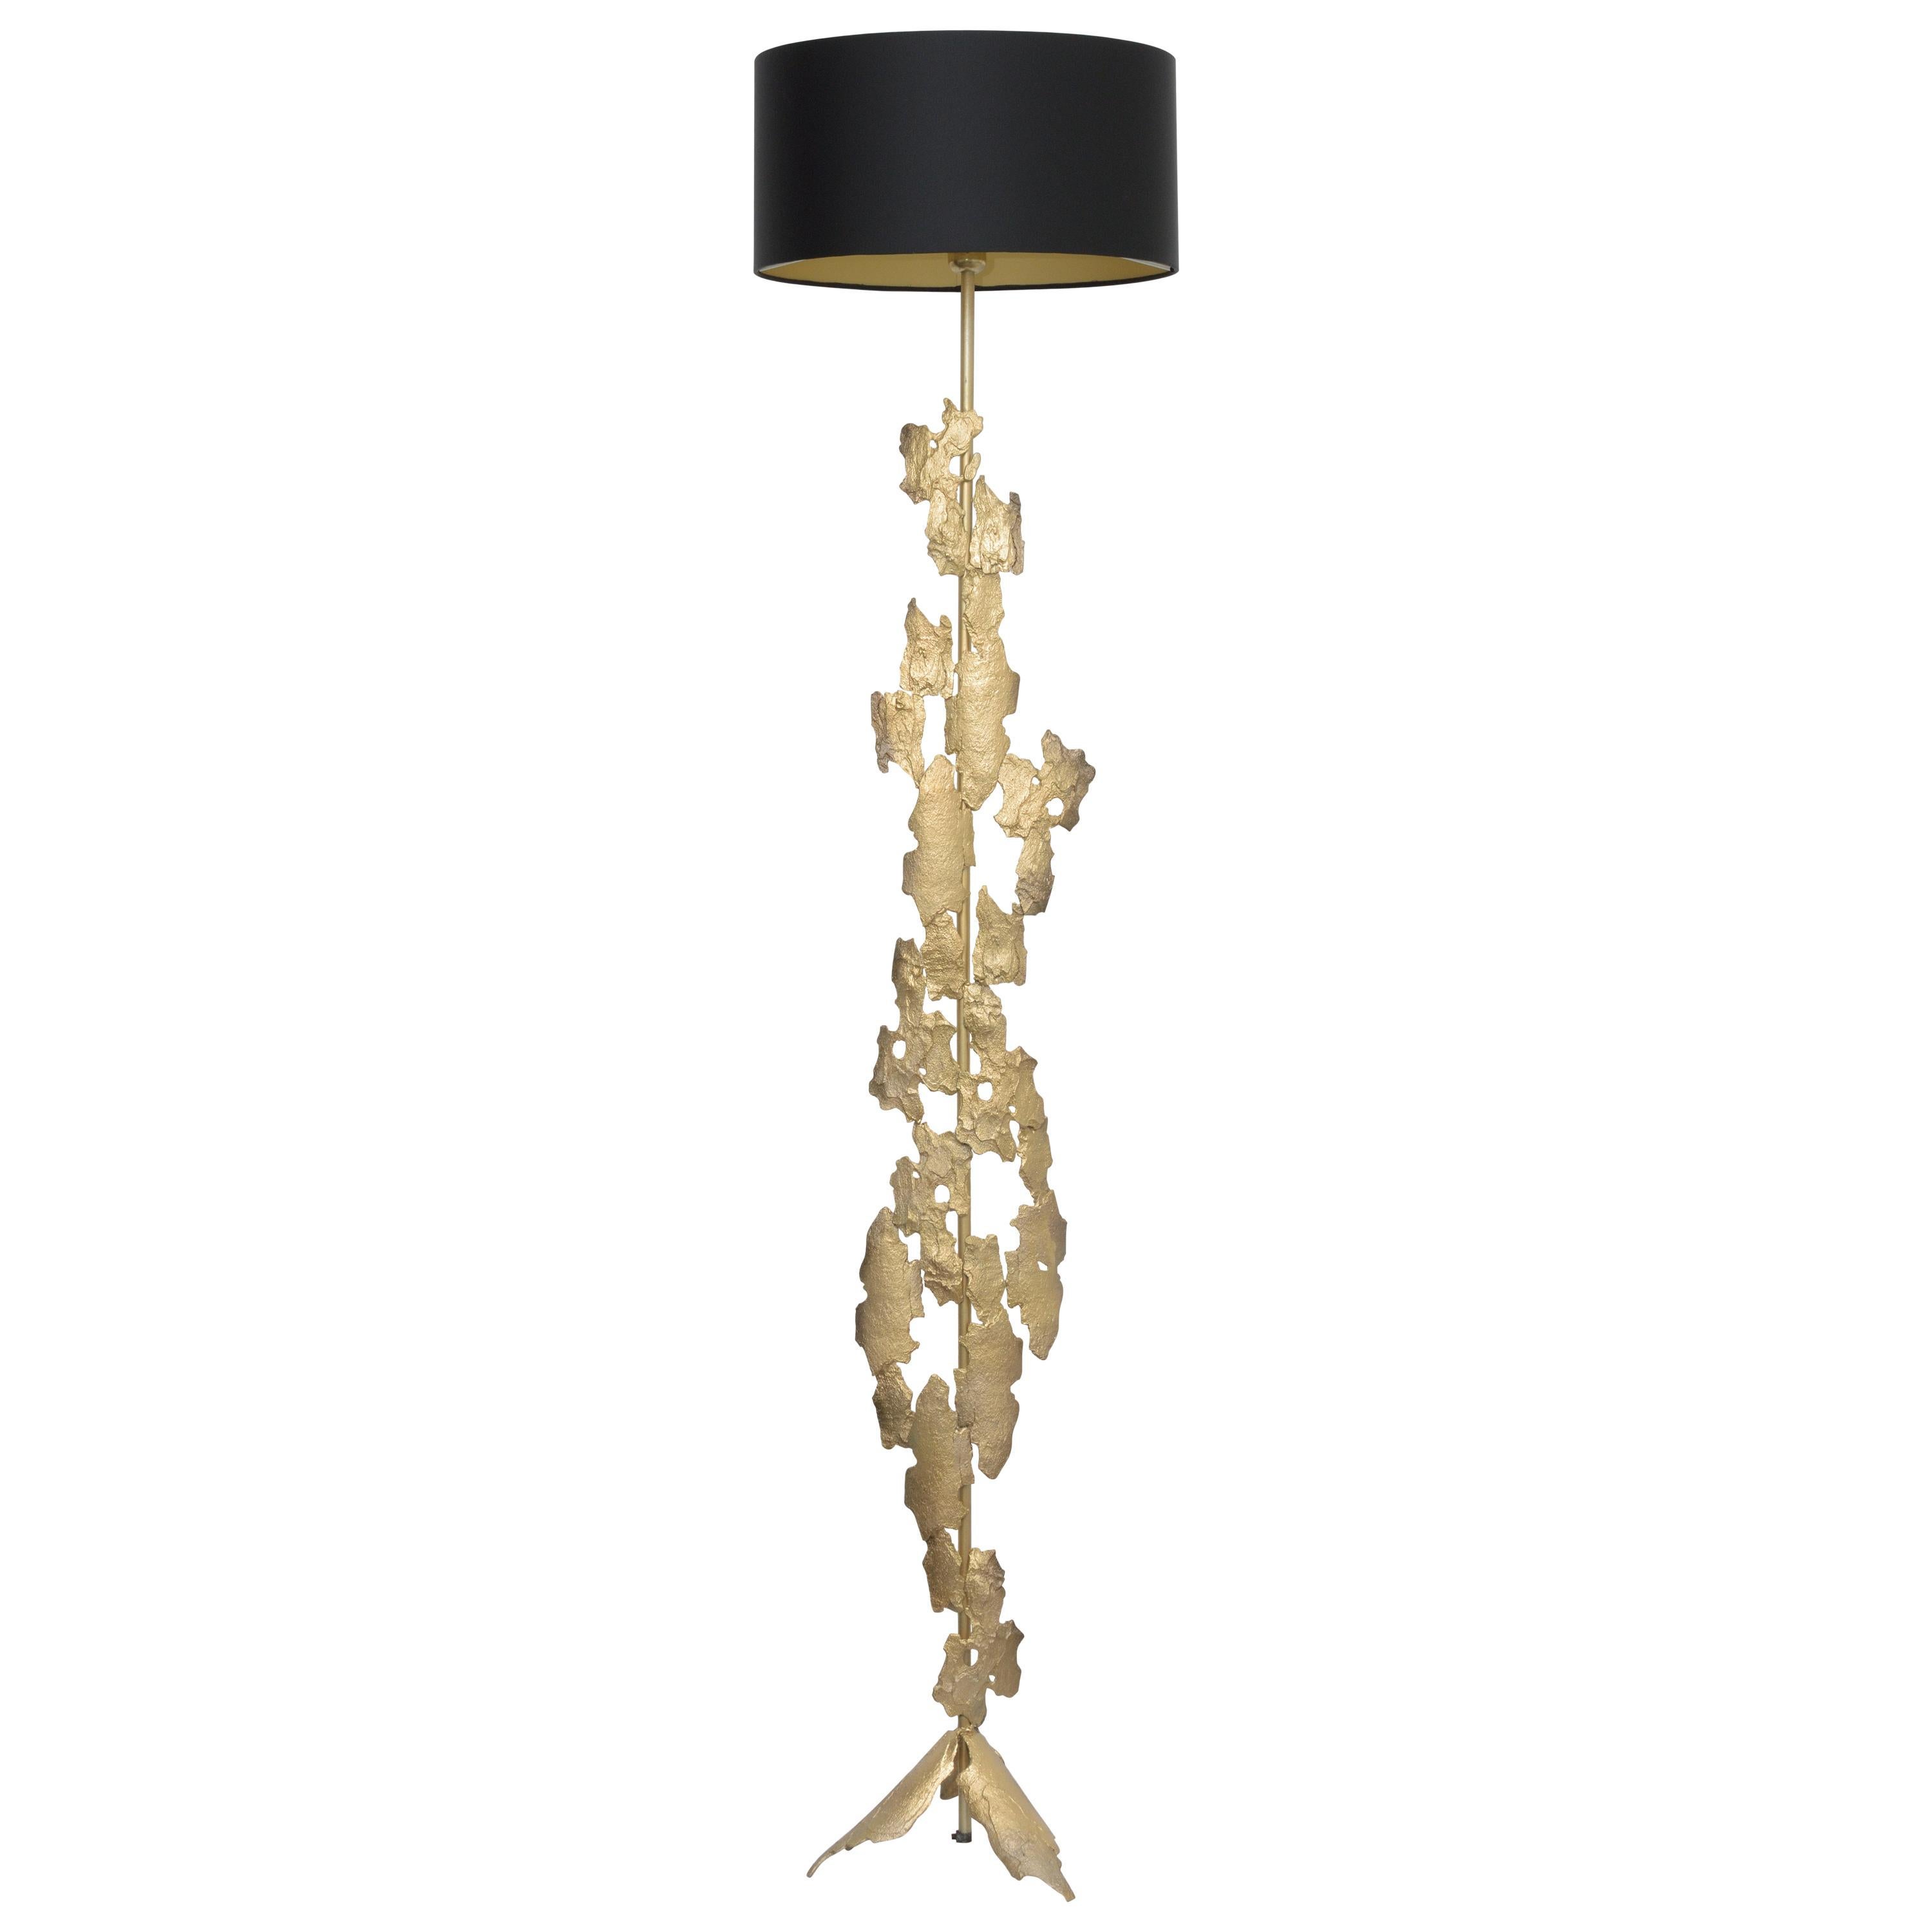  Bronze Floor Lamp 'Tree bark'  - Hand crafted and cast For Sale